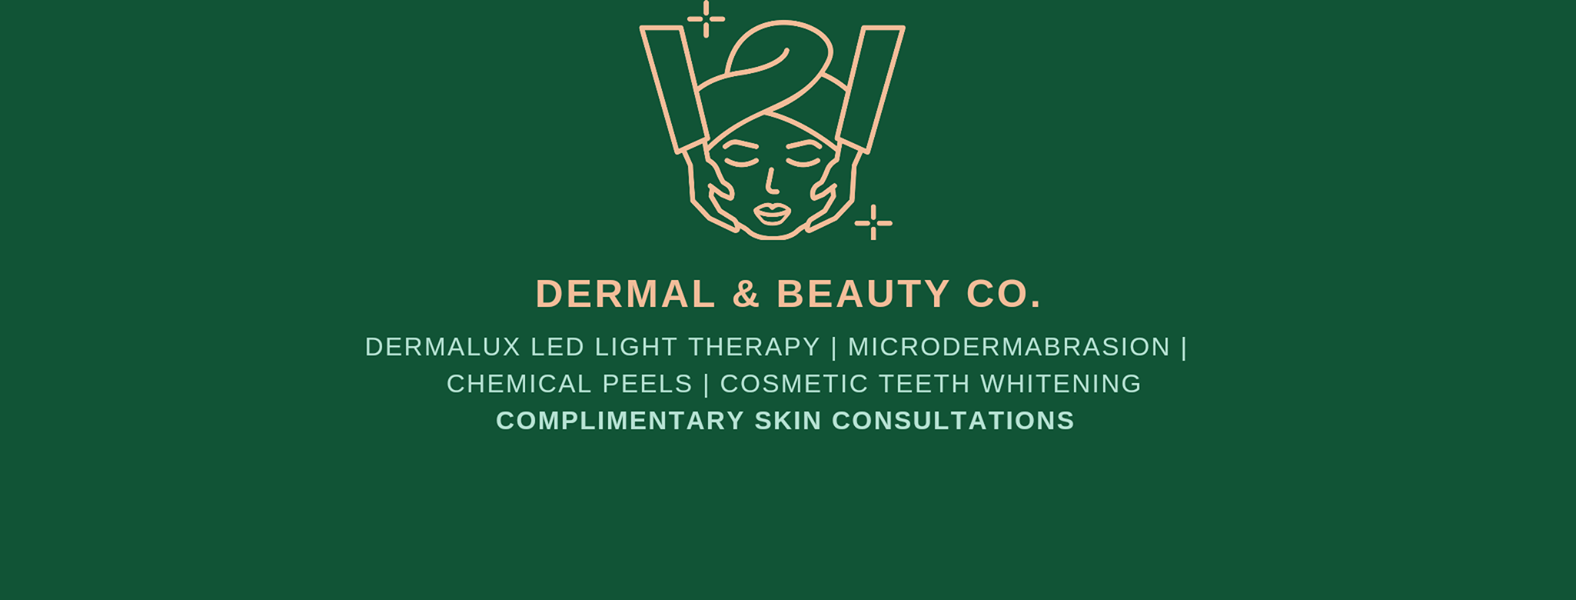 Dermal and Beauty Co